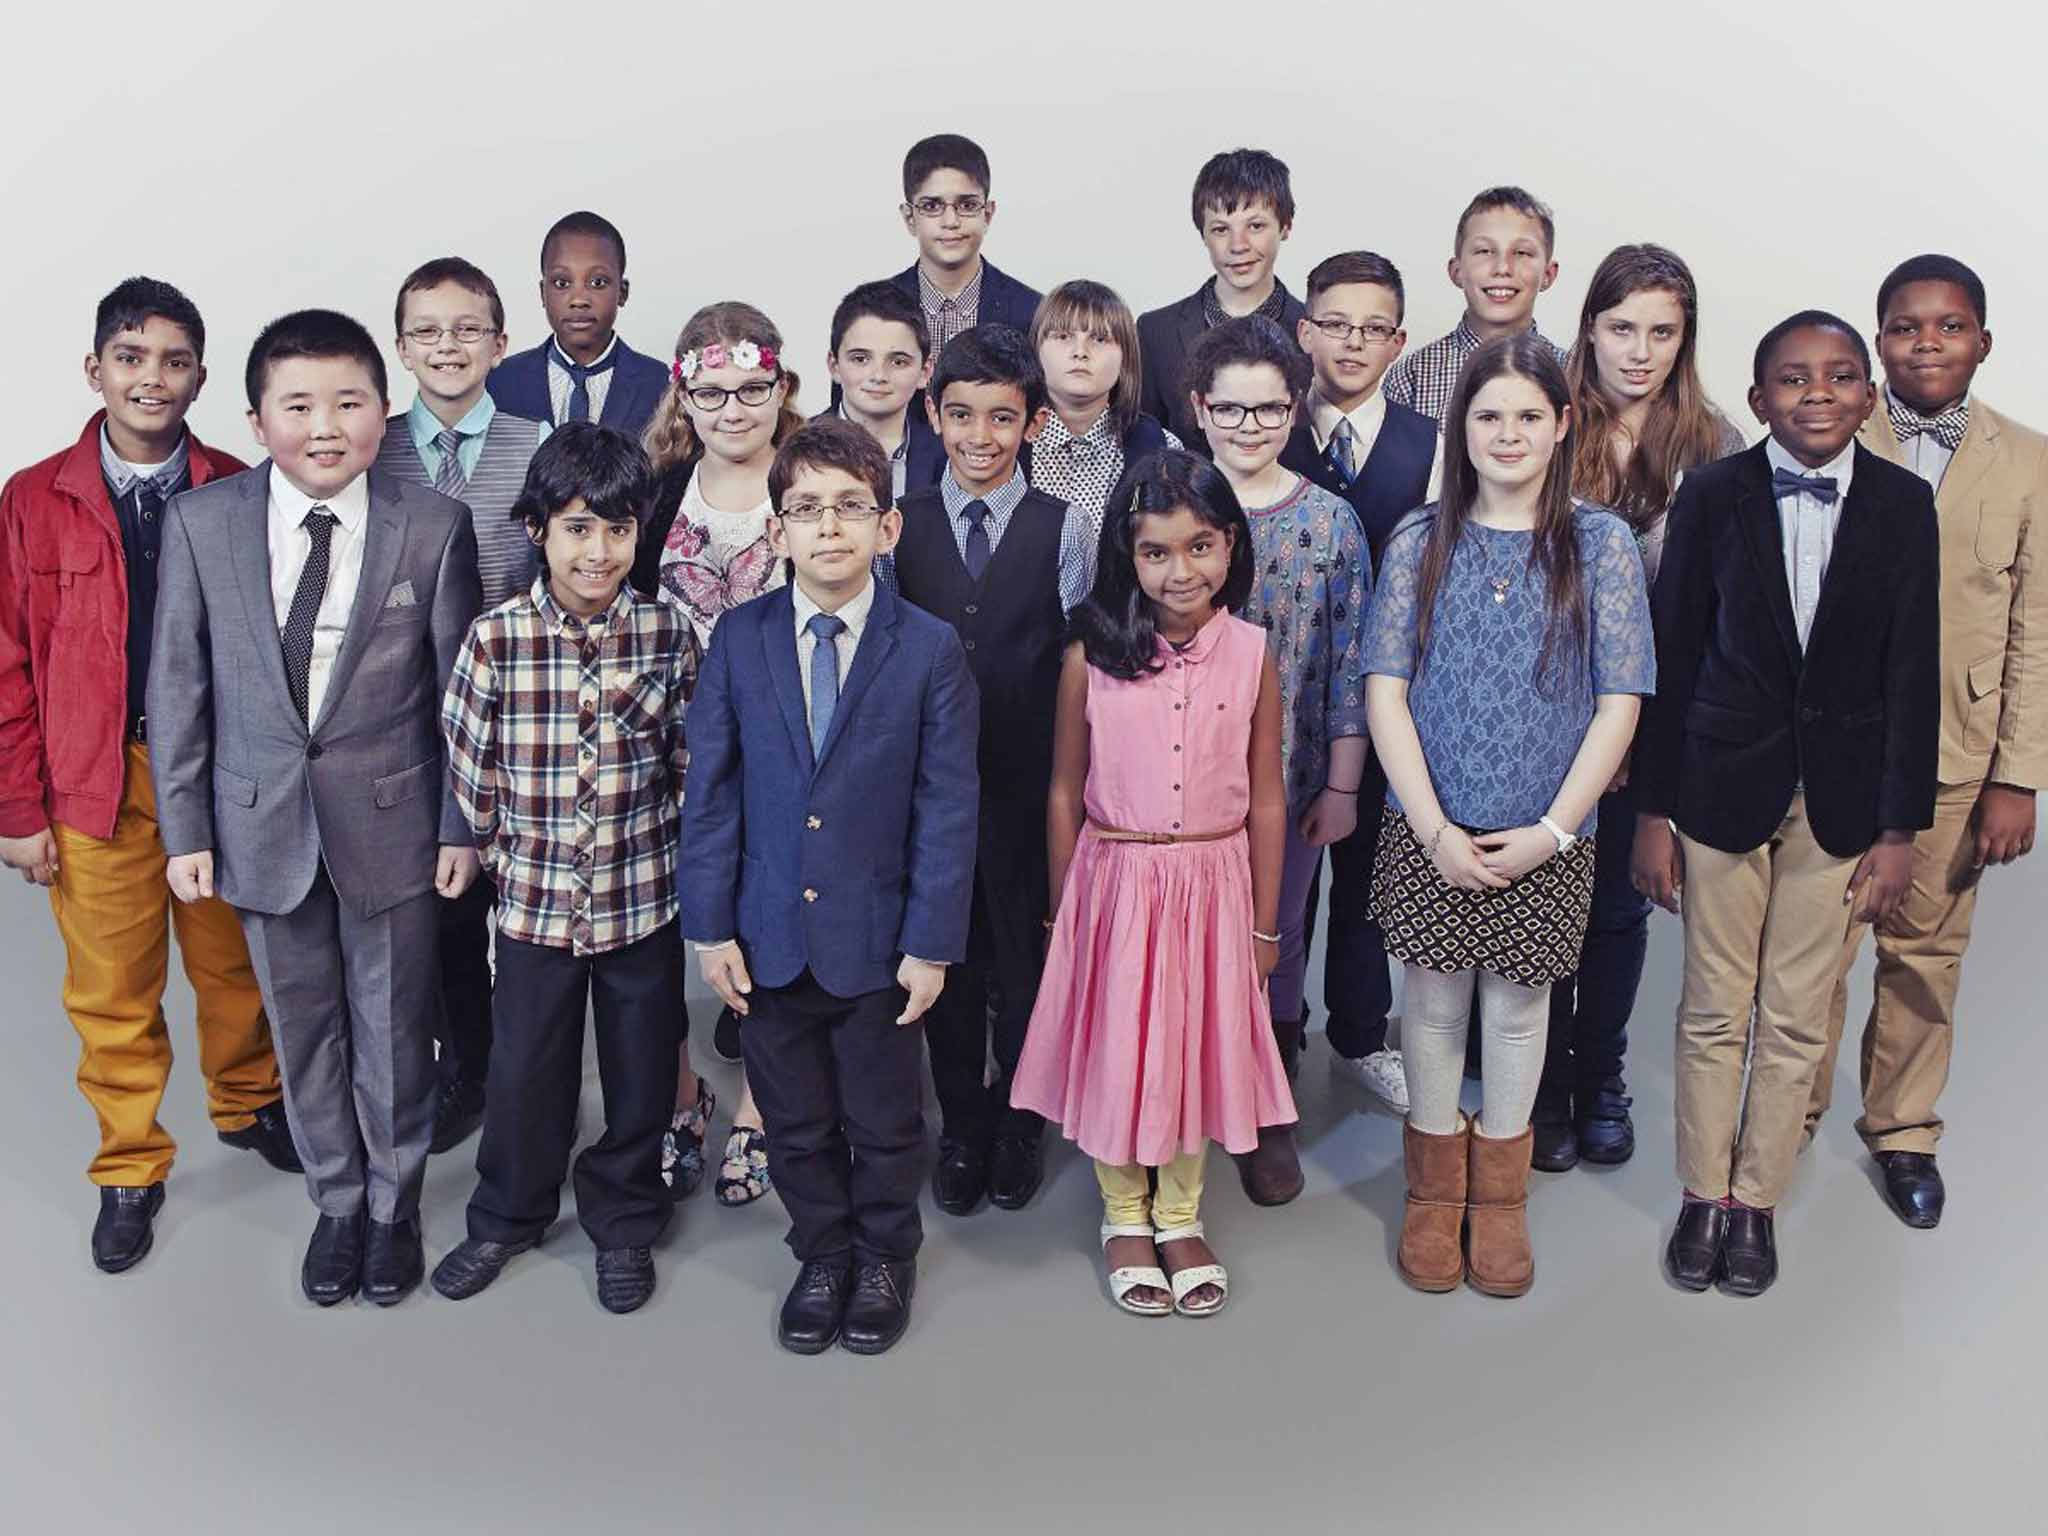 The brainy bunch: the children competing for the gold in 'Child Genius'